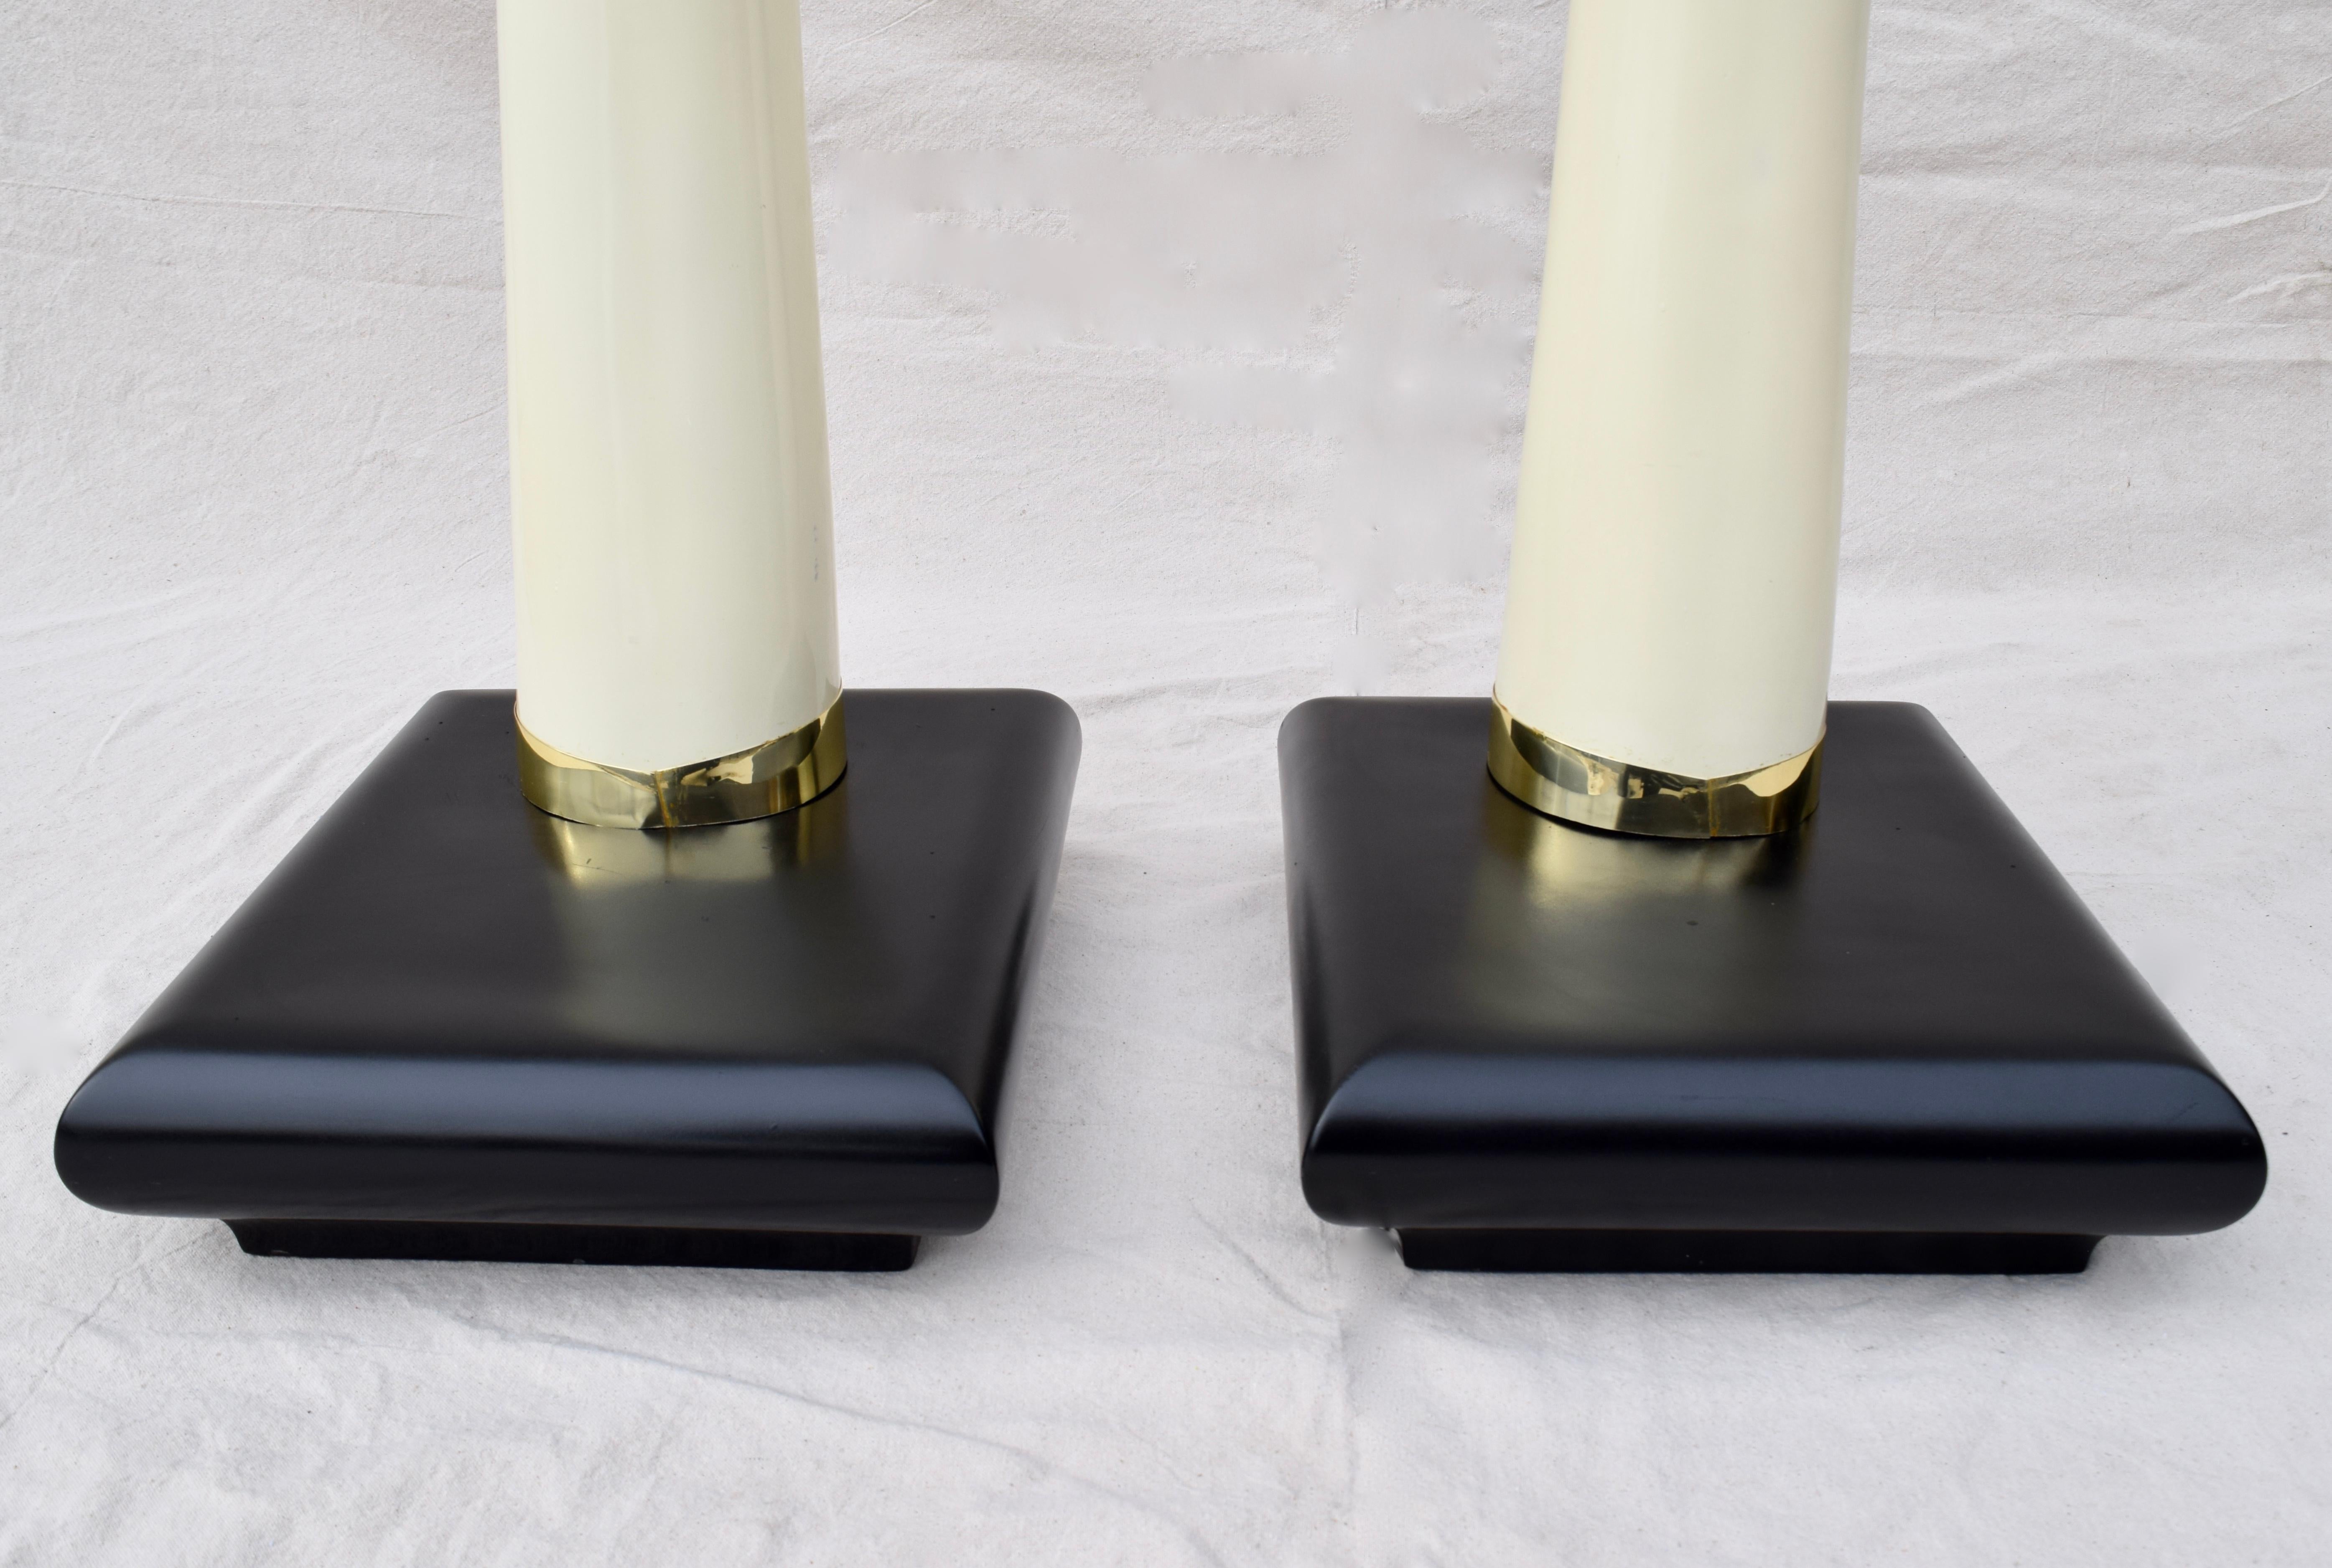 Impressive pair of mid century modern faux tusks of arched monumental form on lacquered wood bases, enhanced with brass collar mounts; circa 1970s. Base dimensions: 18